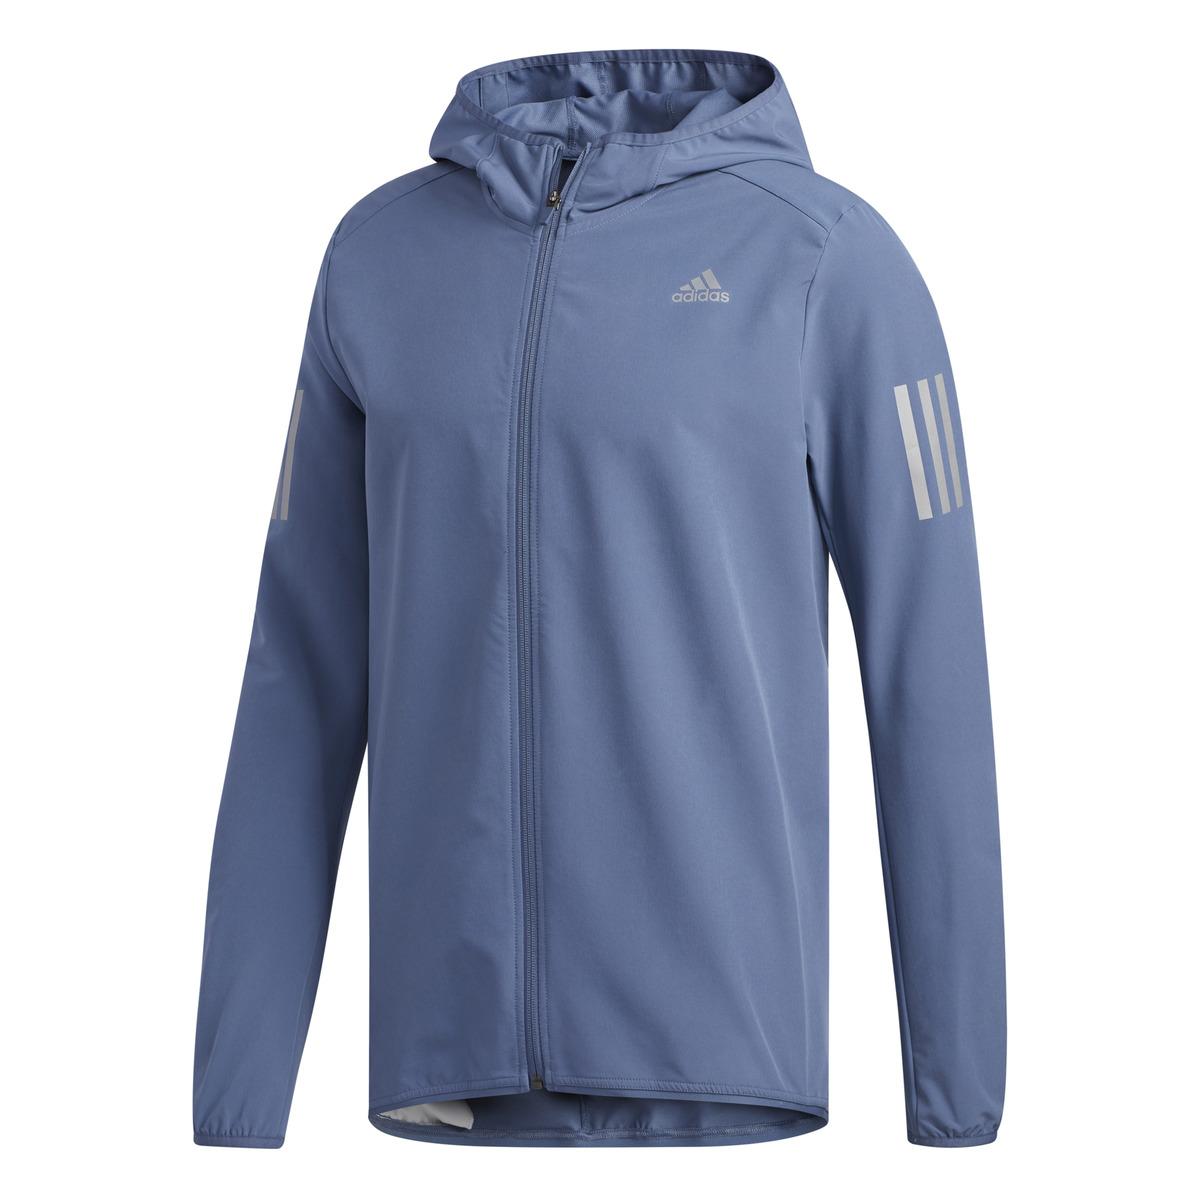 adidas Synthetic Response Sweatshirt in Blue for Men - Lyst